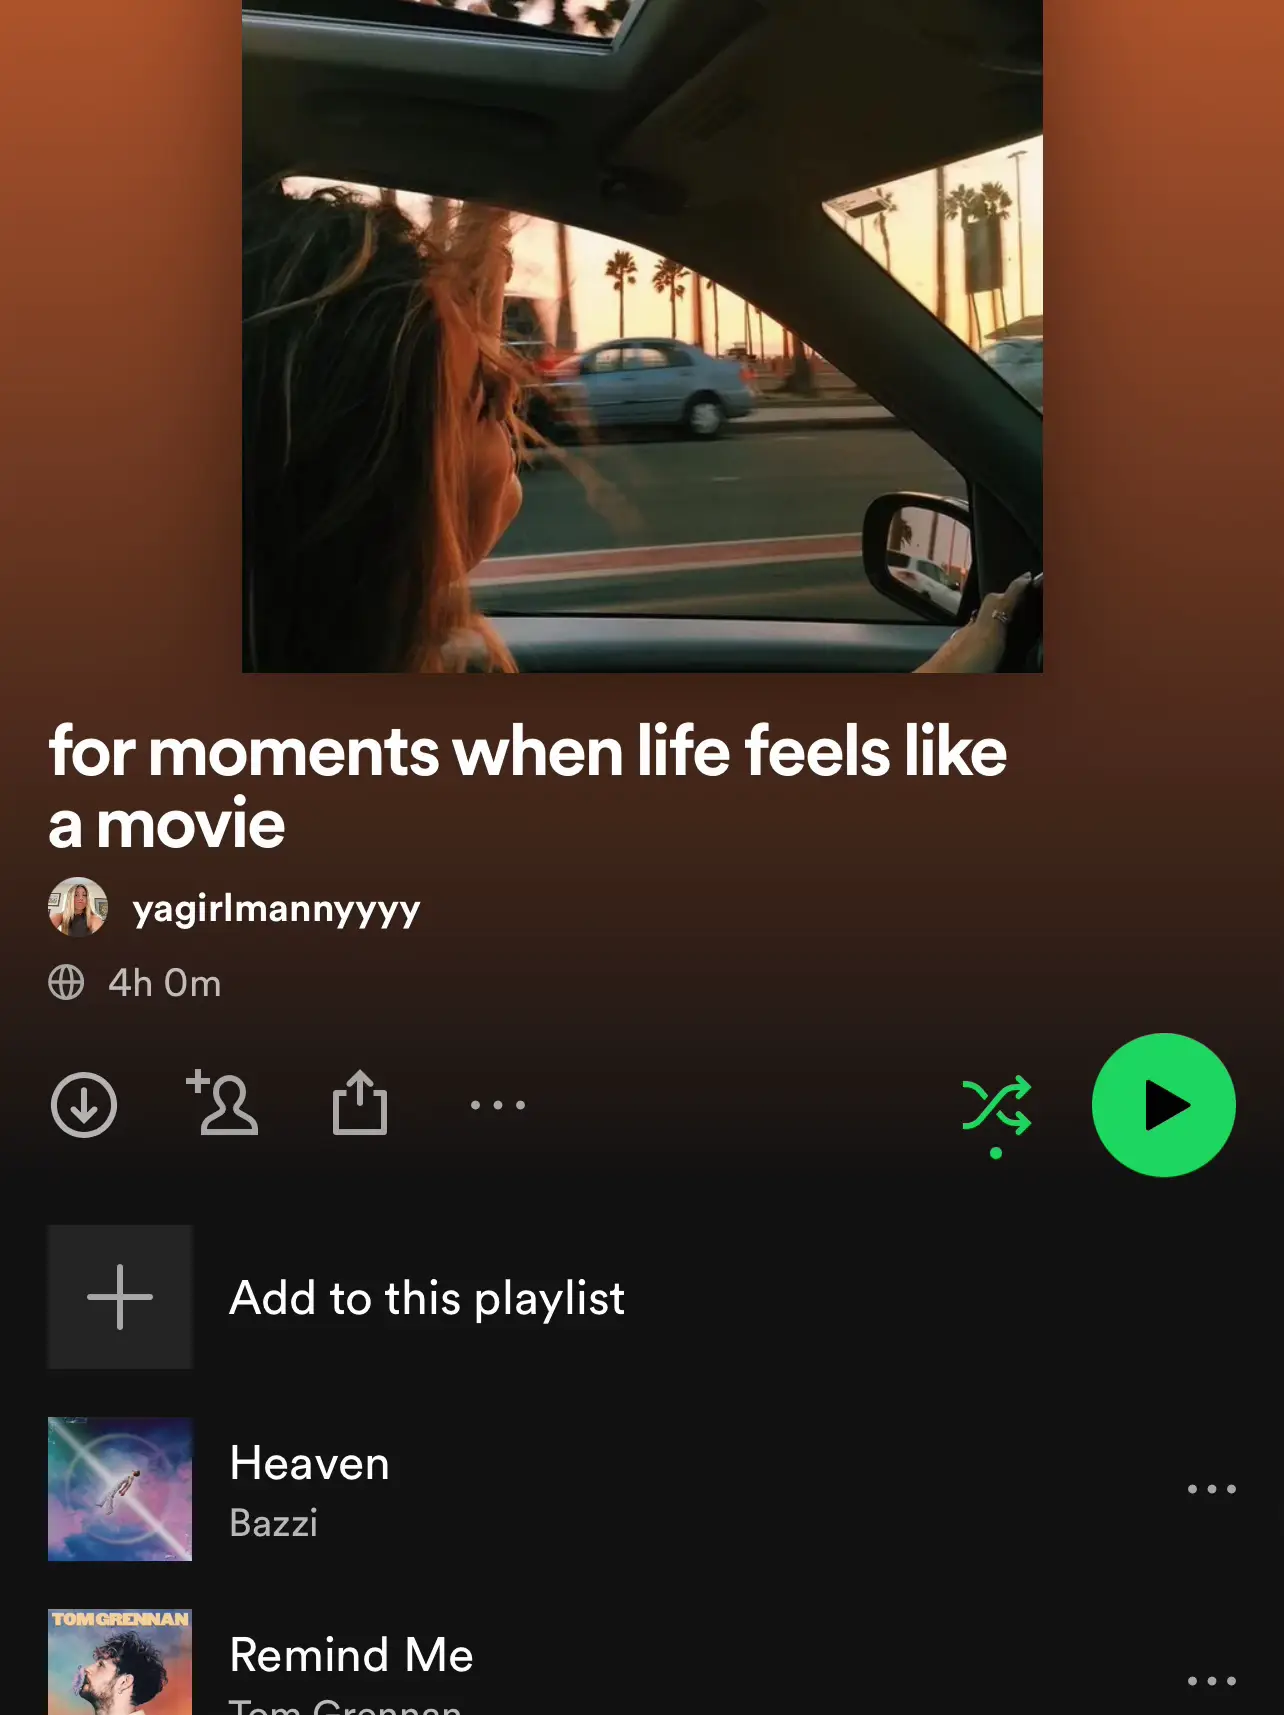  A woman is sitting in a car with a playlist of music on the screen.